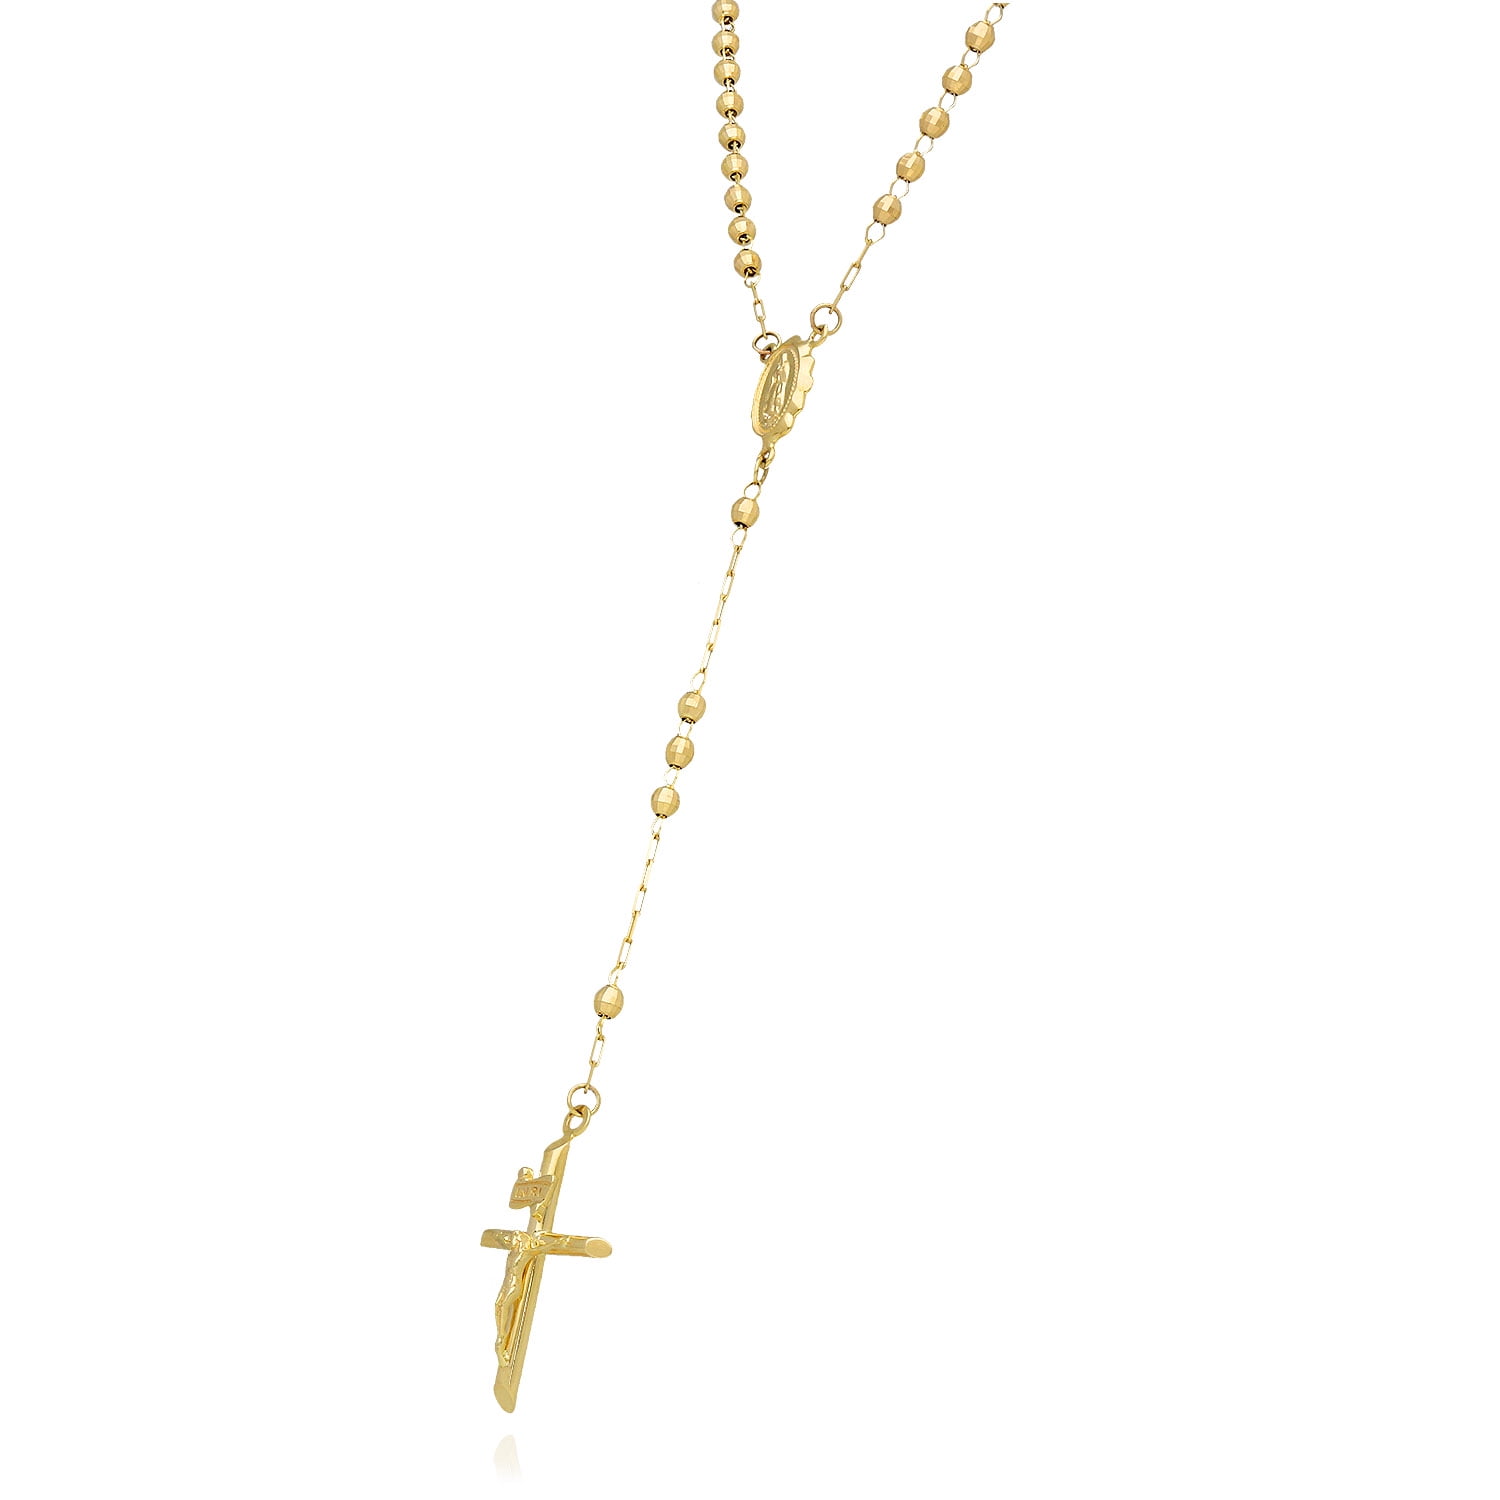 Peoples Rosary Necklace in 10K Tri-Tone Gold - 17